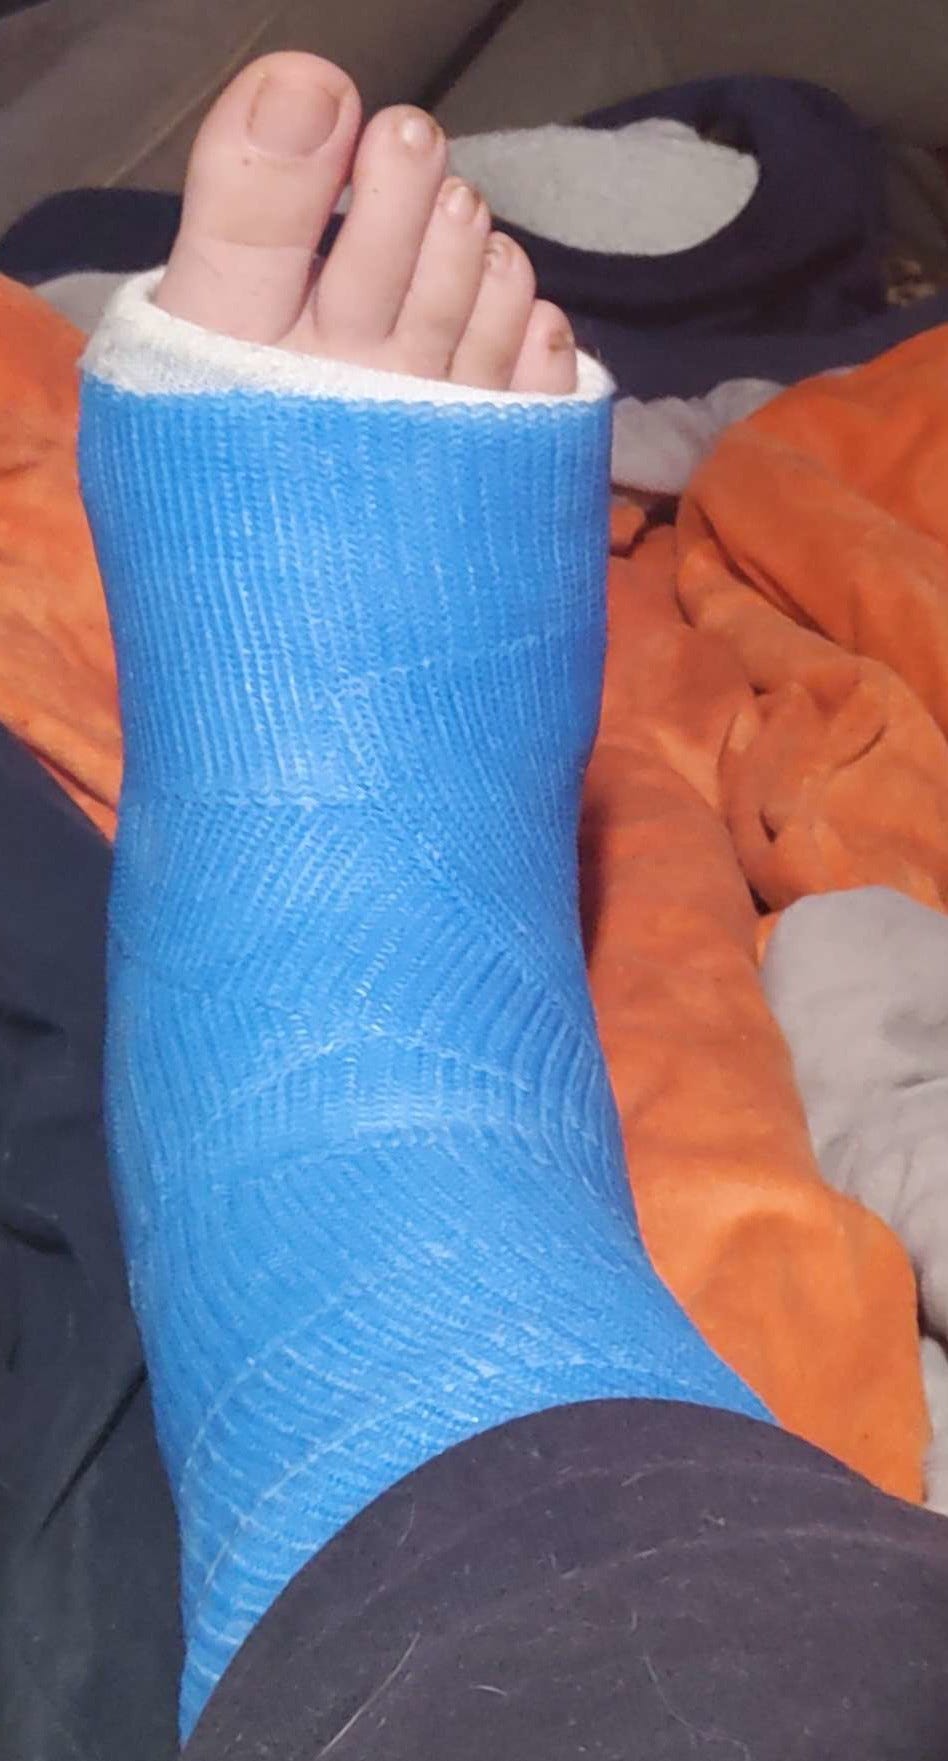 A picture showing a lower leg encased in a blue cast. The top is covered by trousers, and the toes stick out of the bottom.